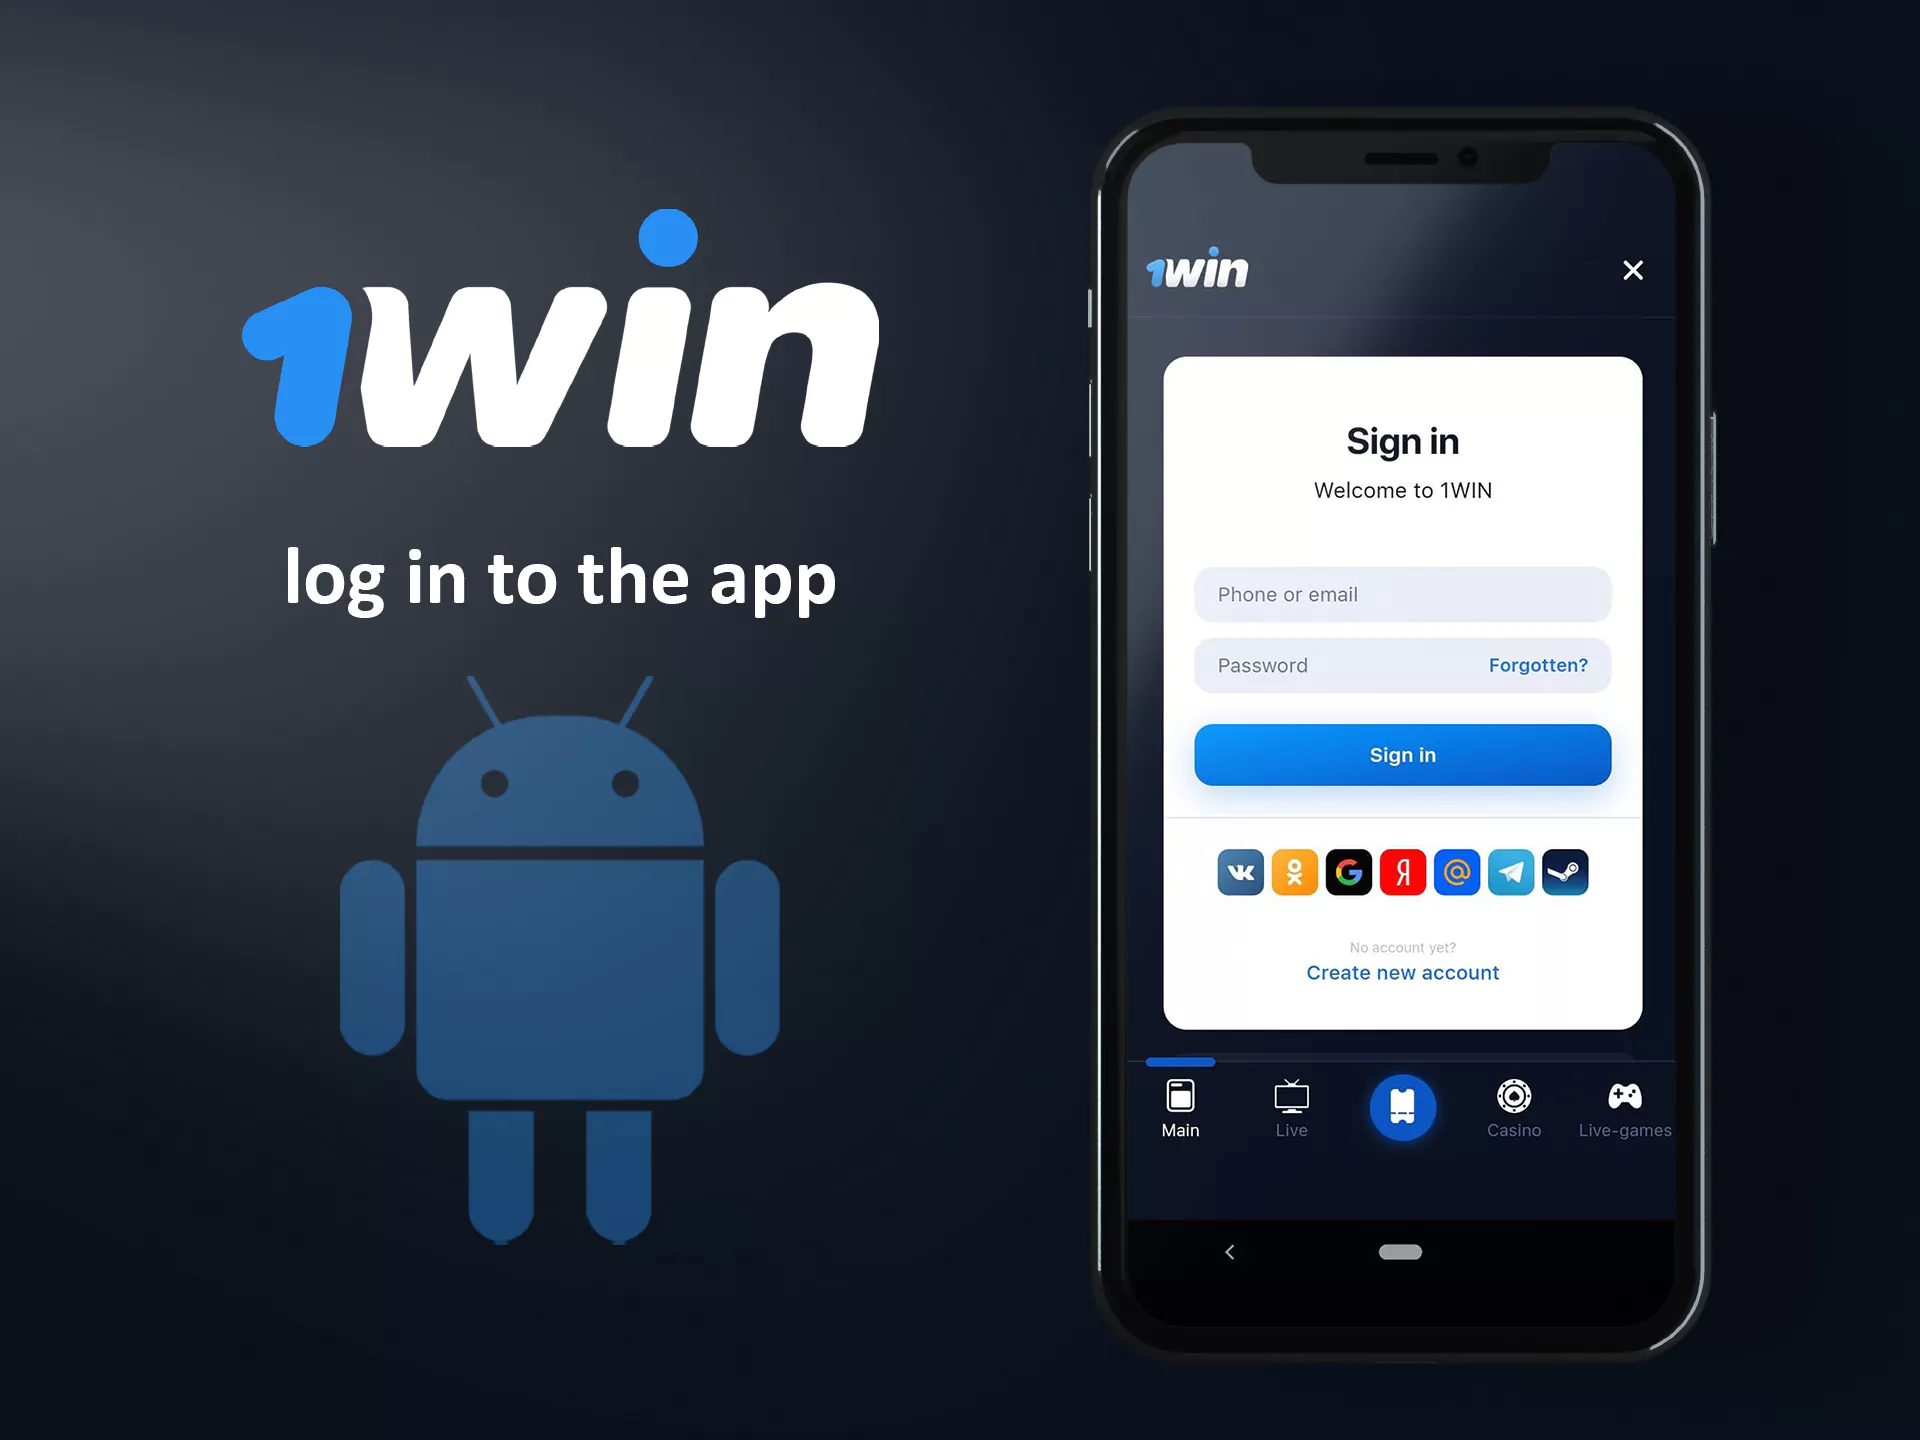 Run the 1Win app and log in to your account.